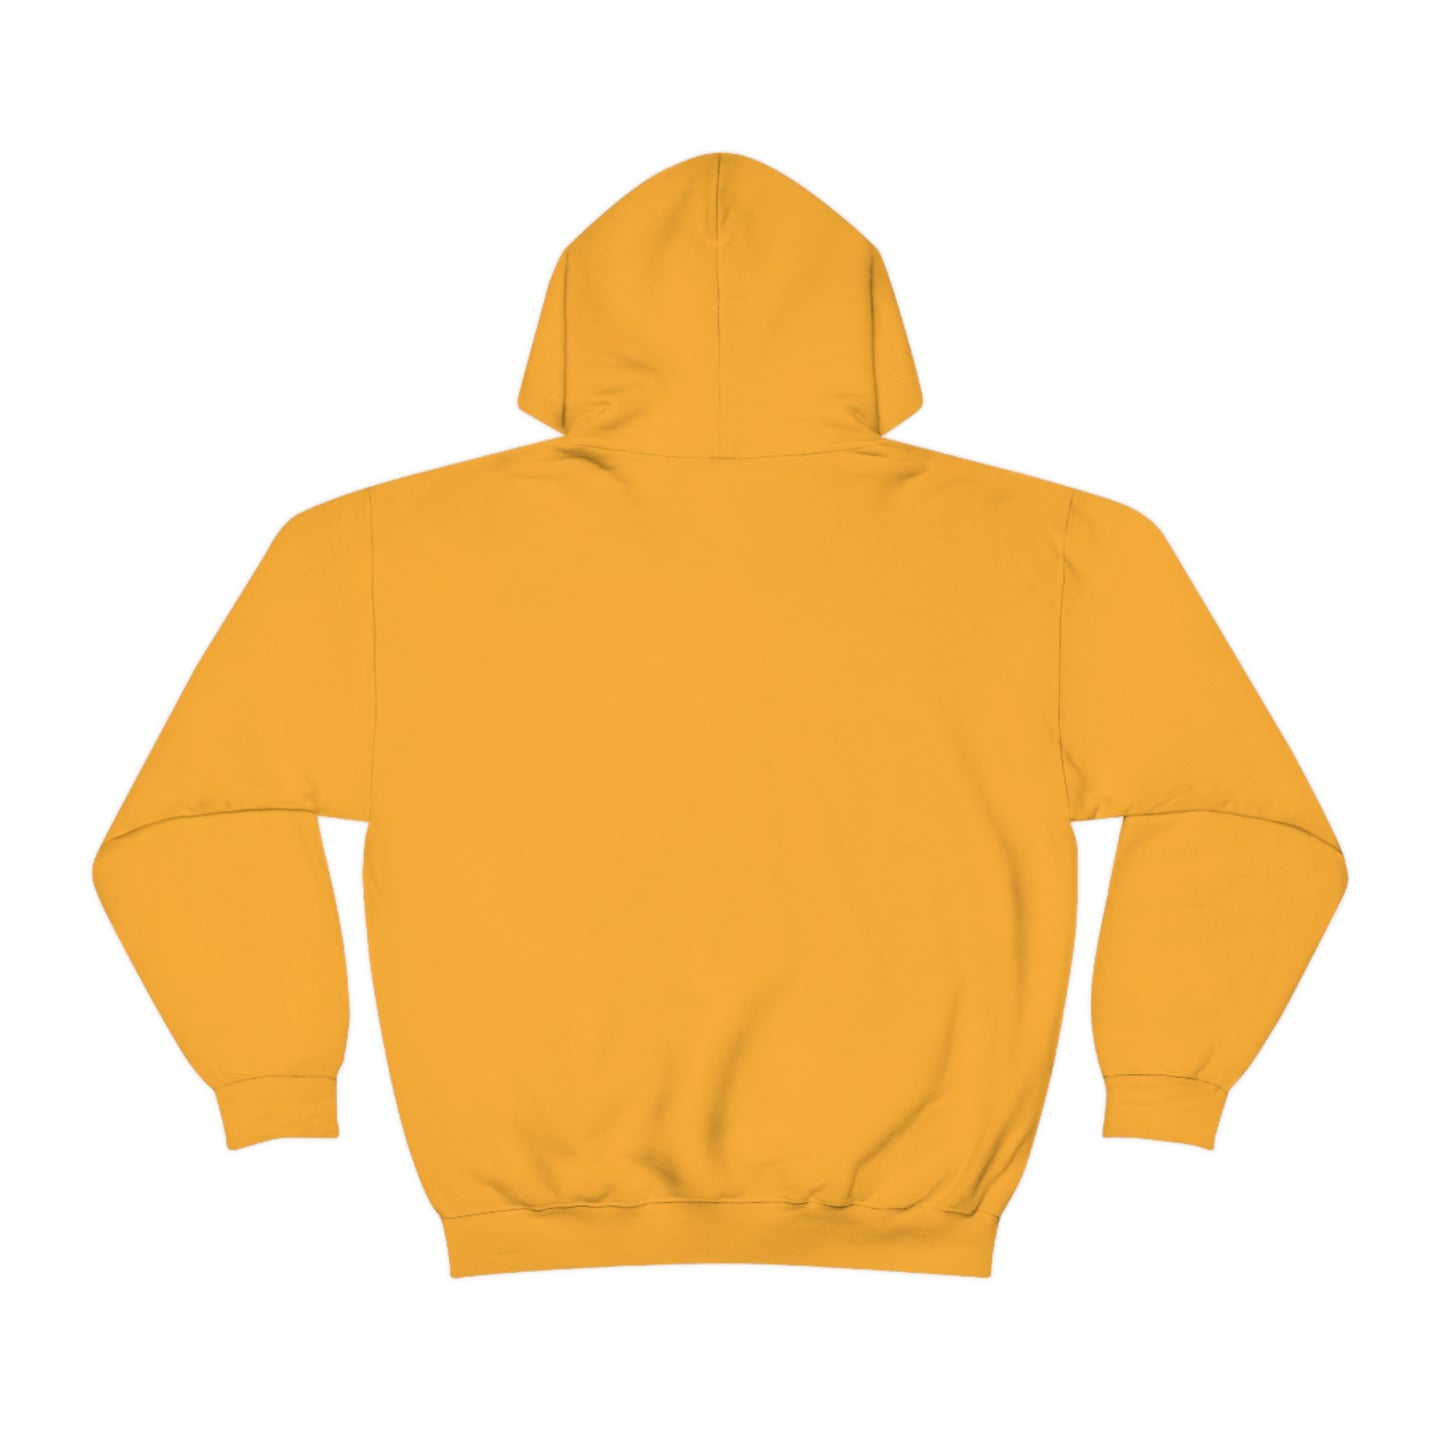 Day After Thanksgiving- Hooded Sweatshirt